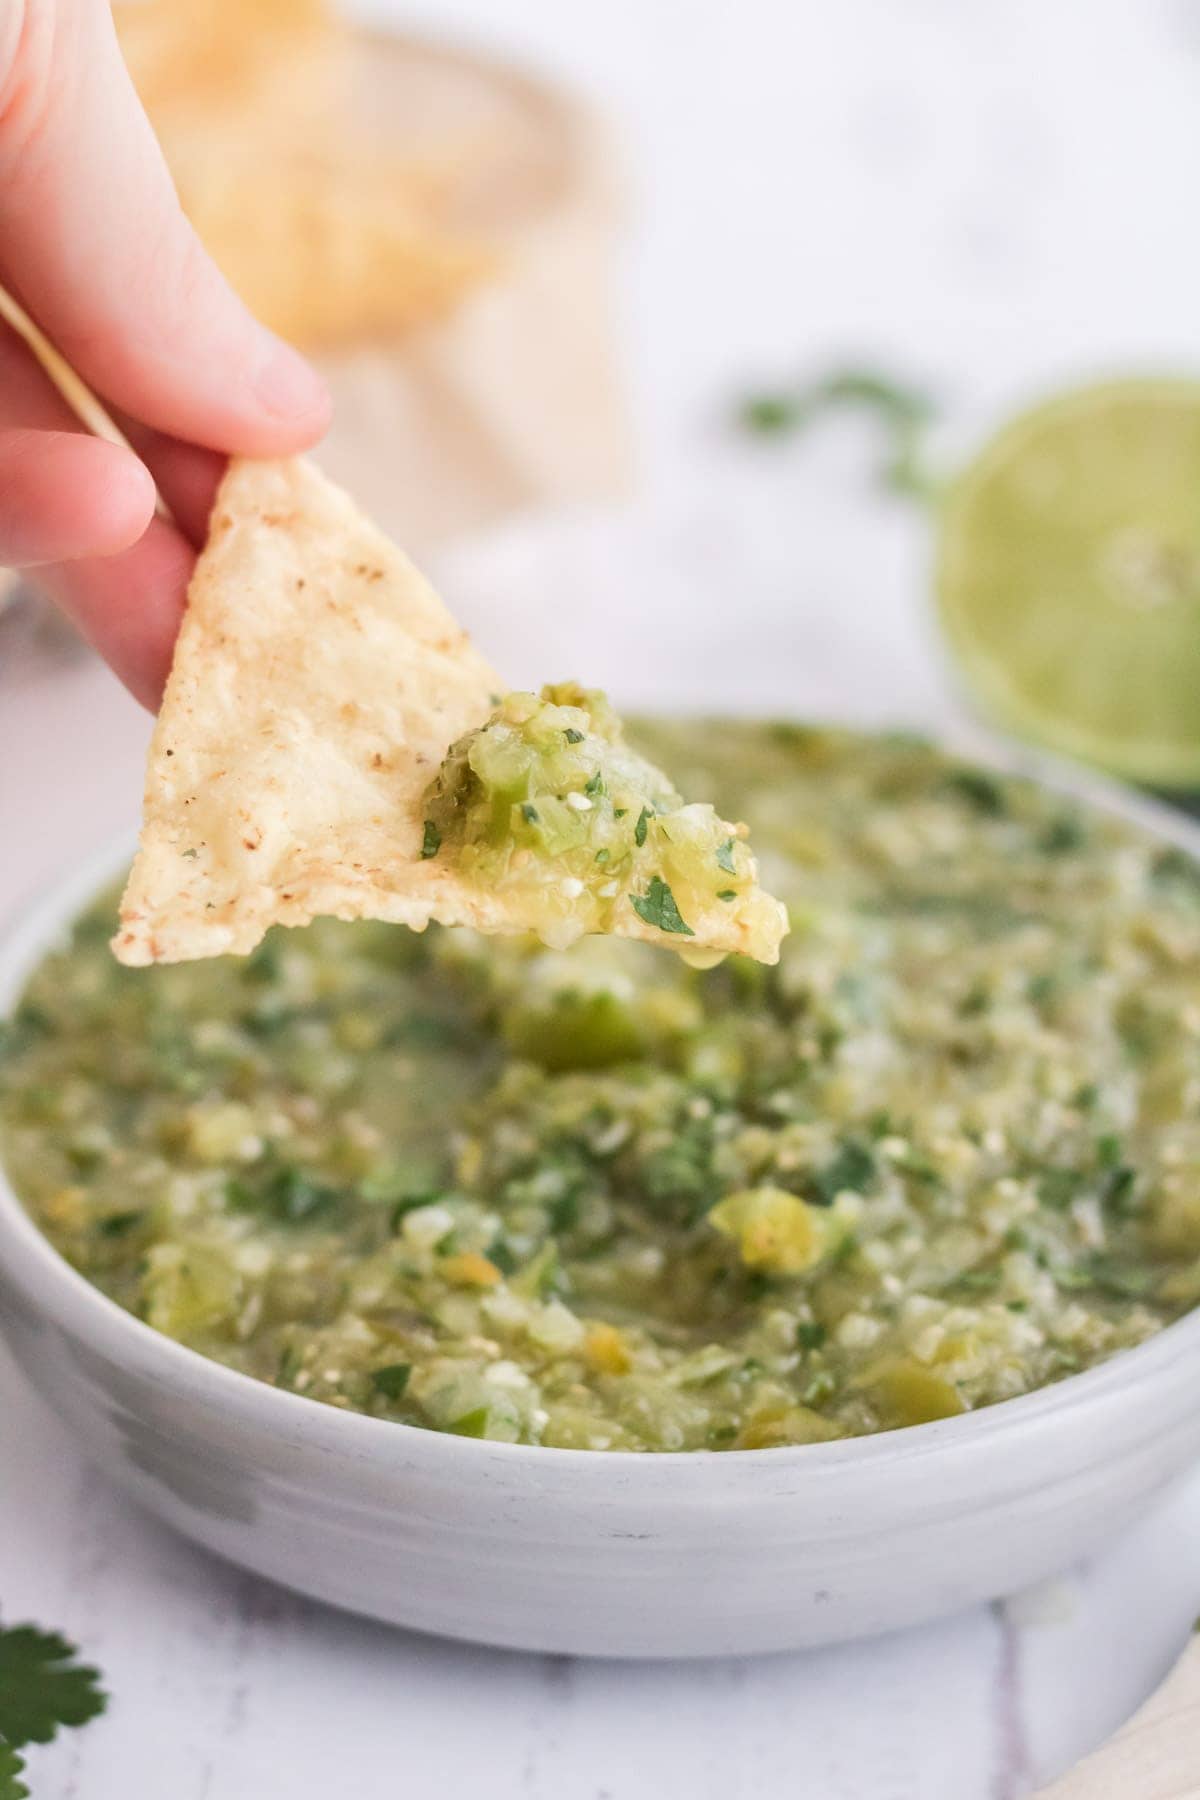 chip dipping in salsa verde, limes, white bowl